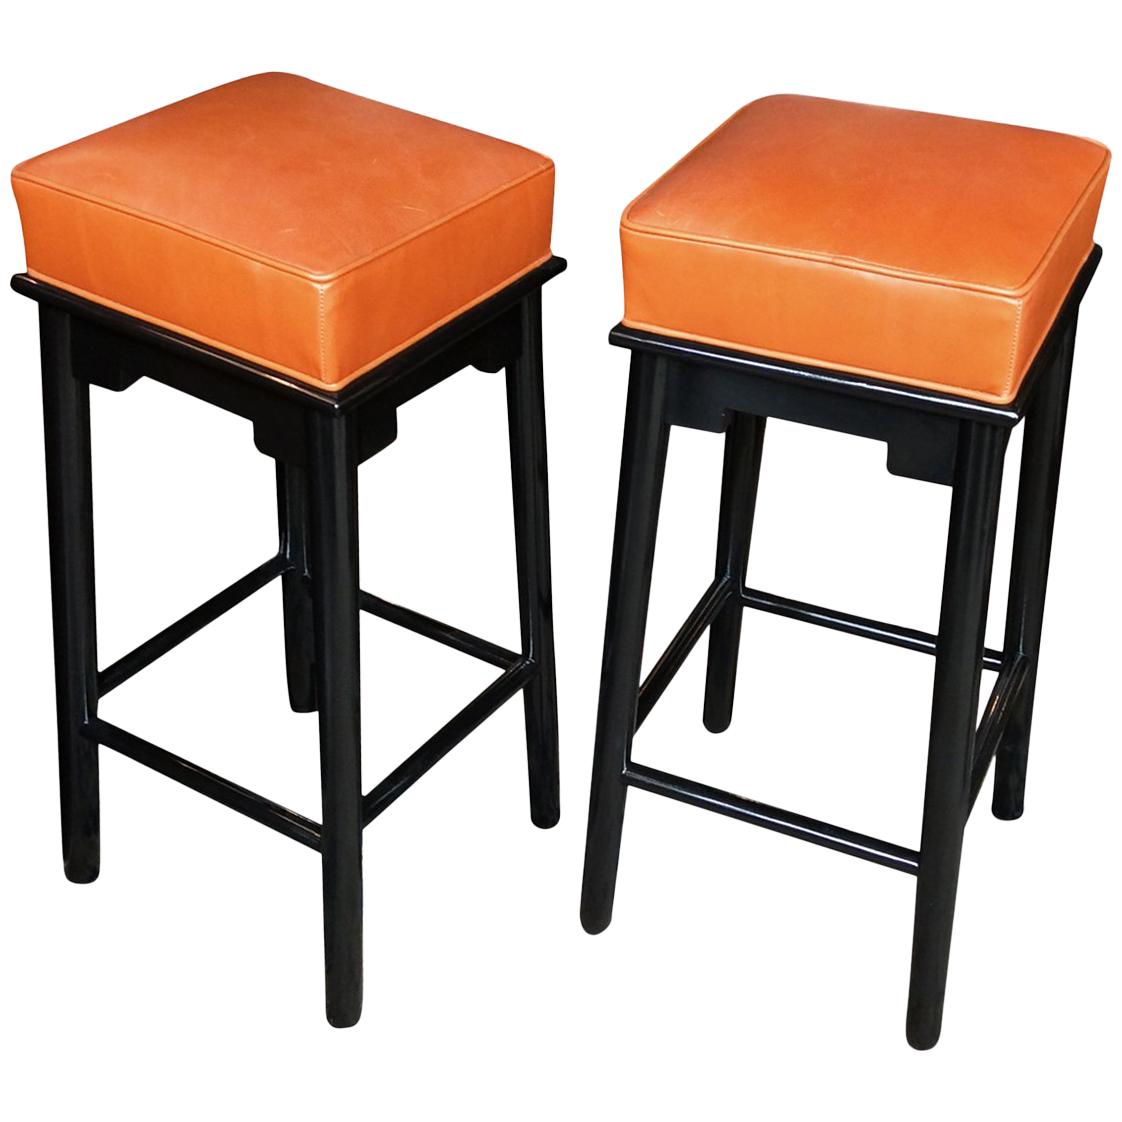 Pair of 1950s Leather and Lacquered Bar Stools in the Style of James Mont